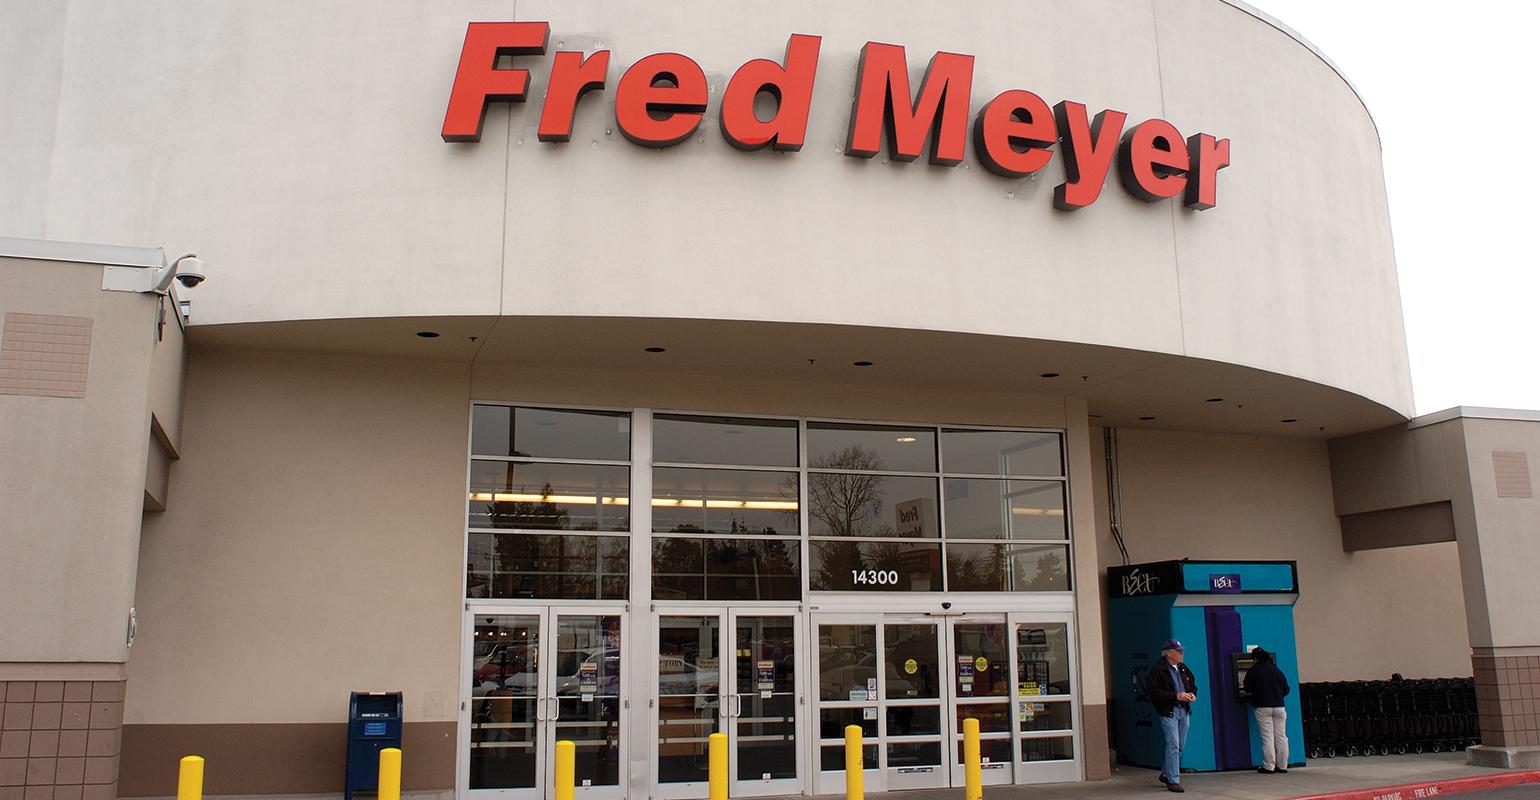 Fred Meyer awards bonuses, new benefits to workers after virus